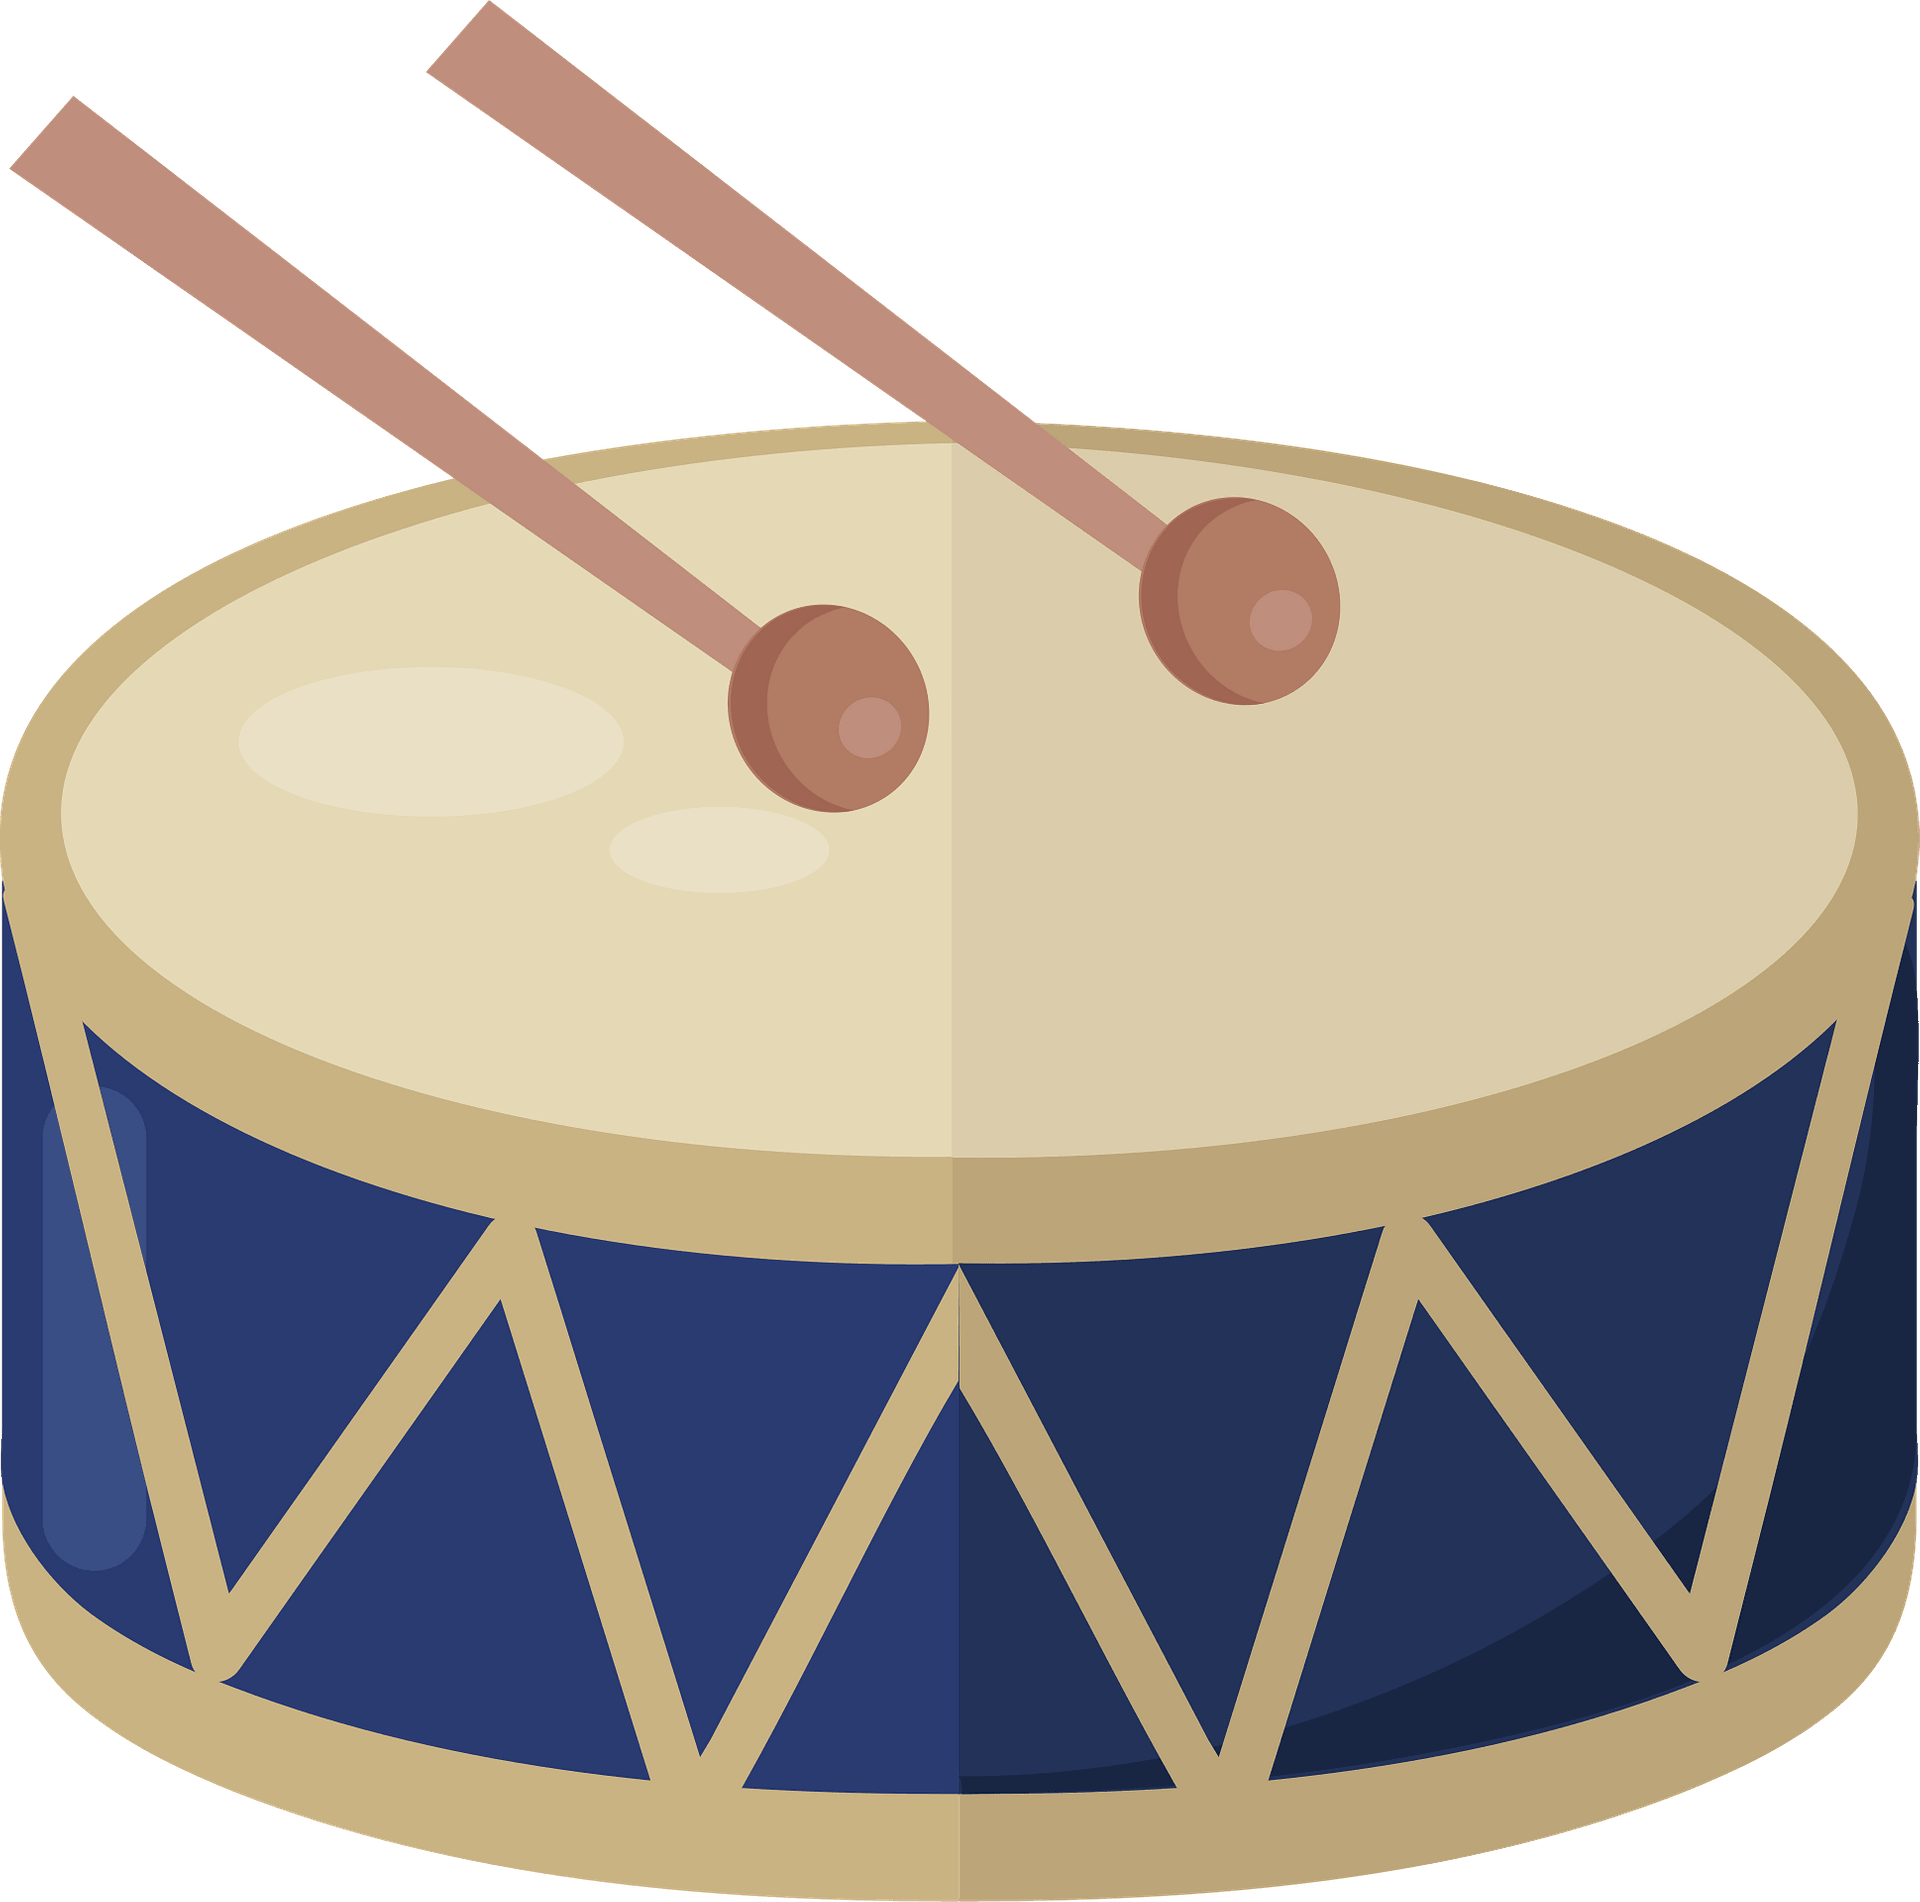 Bass Drum Marching Percussion Clip Art, PNG, 831x900px, Bass Drum ...